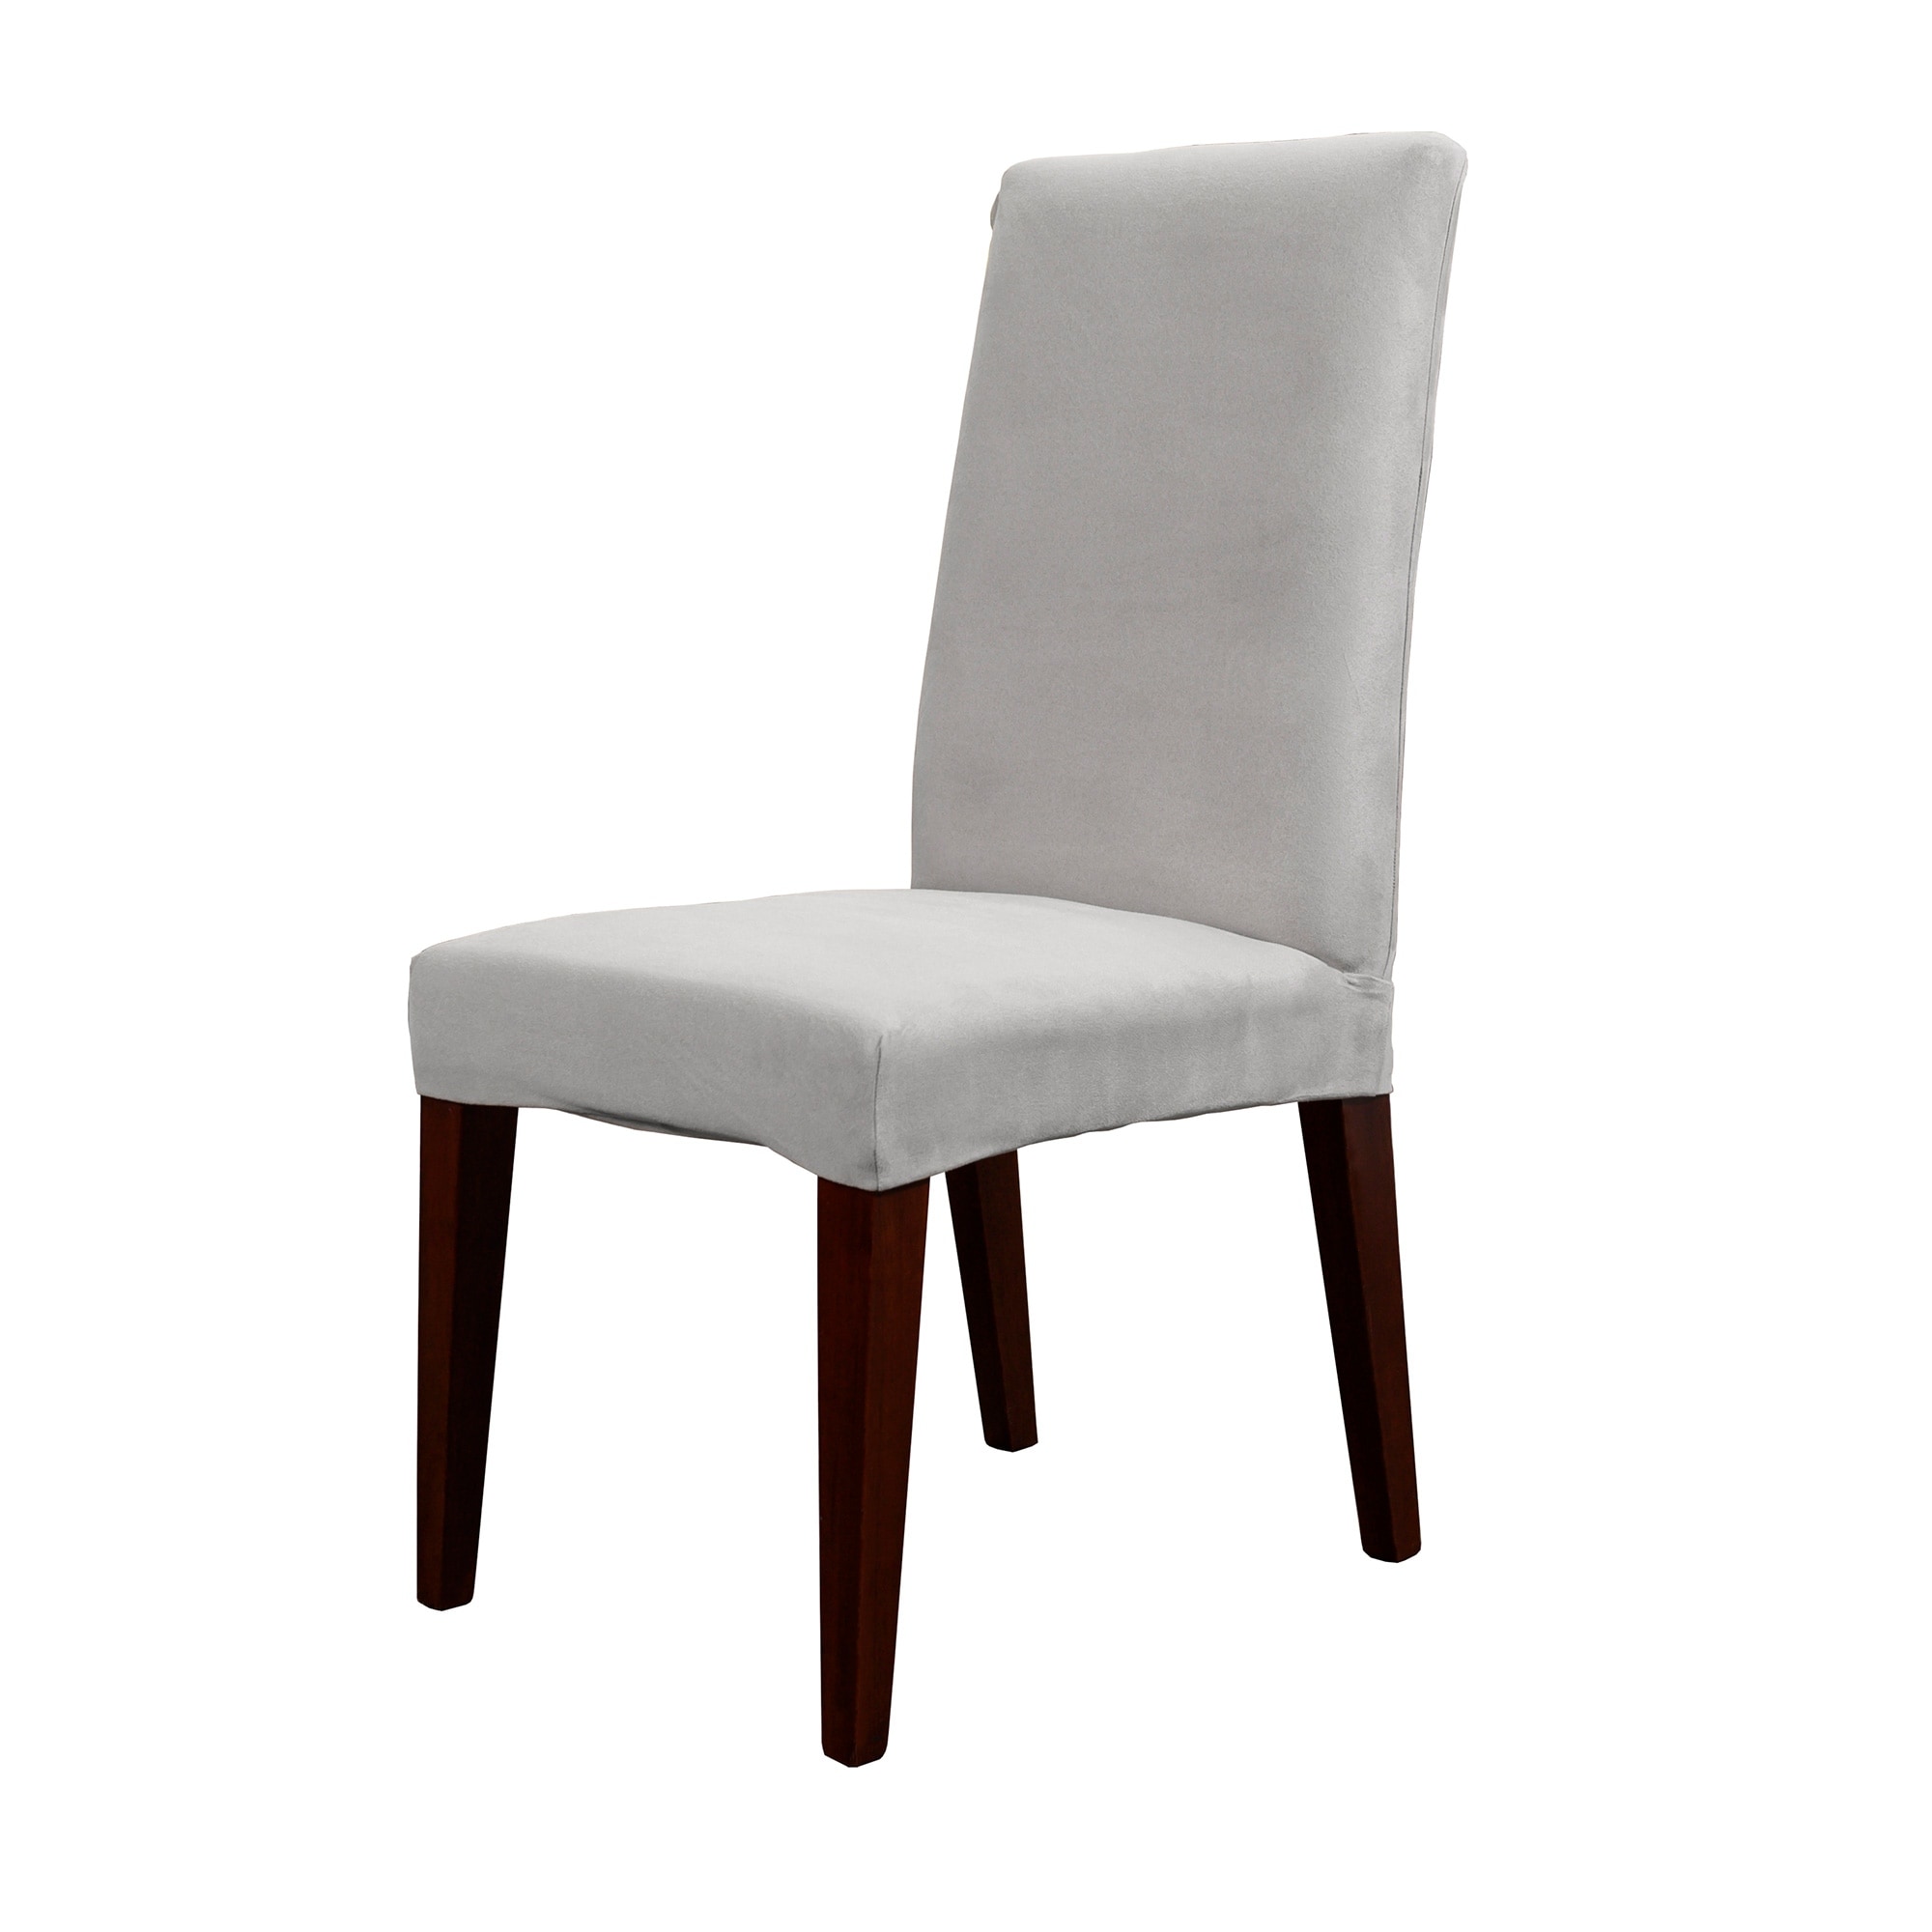 Shorty Dining Room Chair Slipcover NEW Sure Fit Monaco White/Midnight 